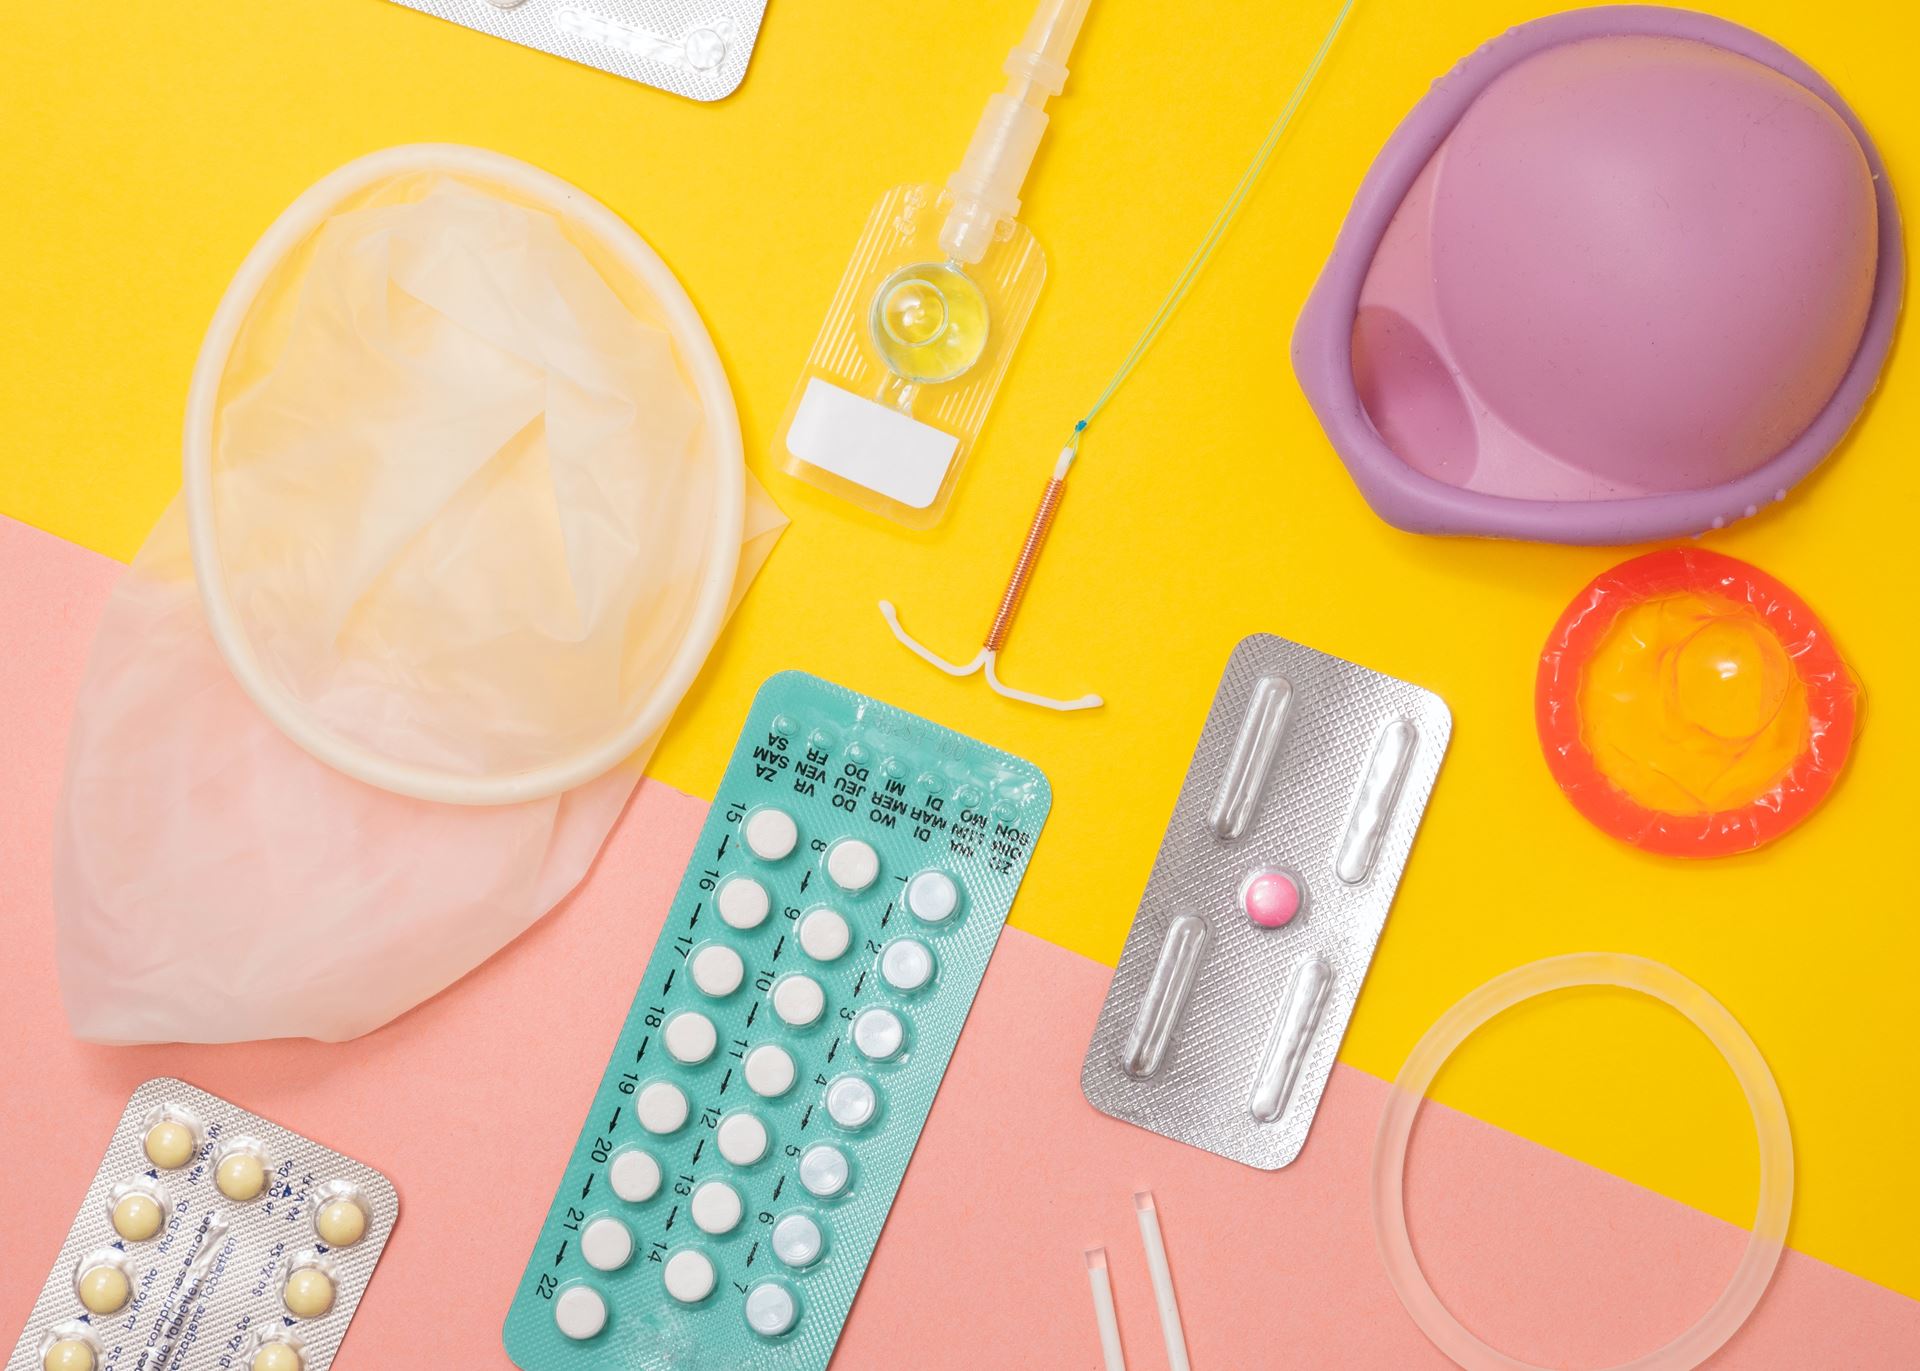 types of contraception